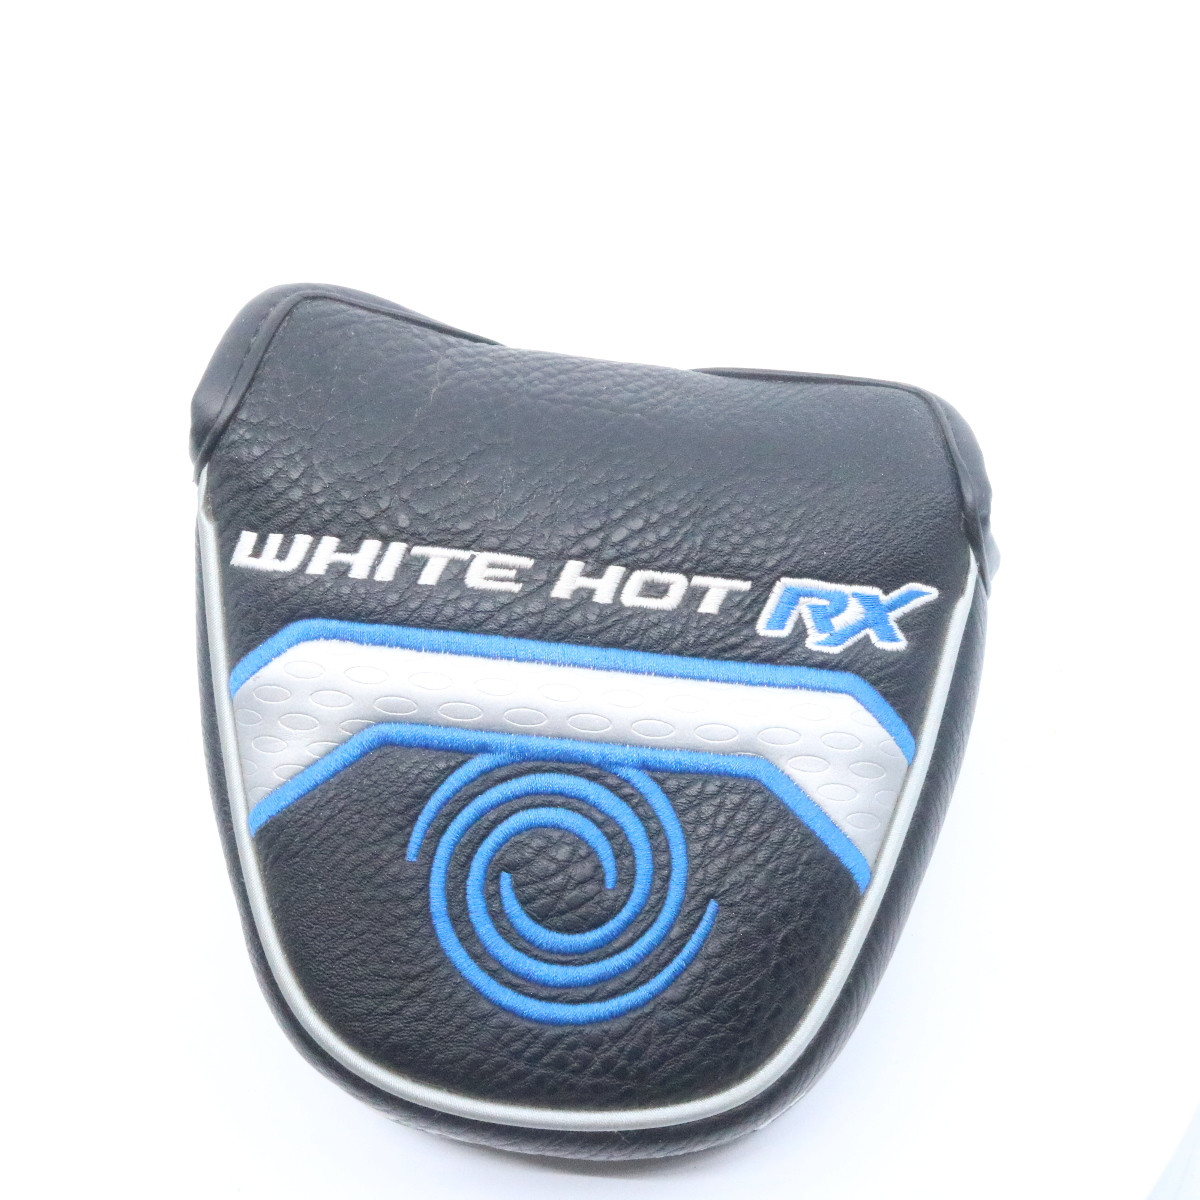 odyssey white hot putter covers